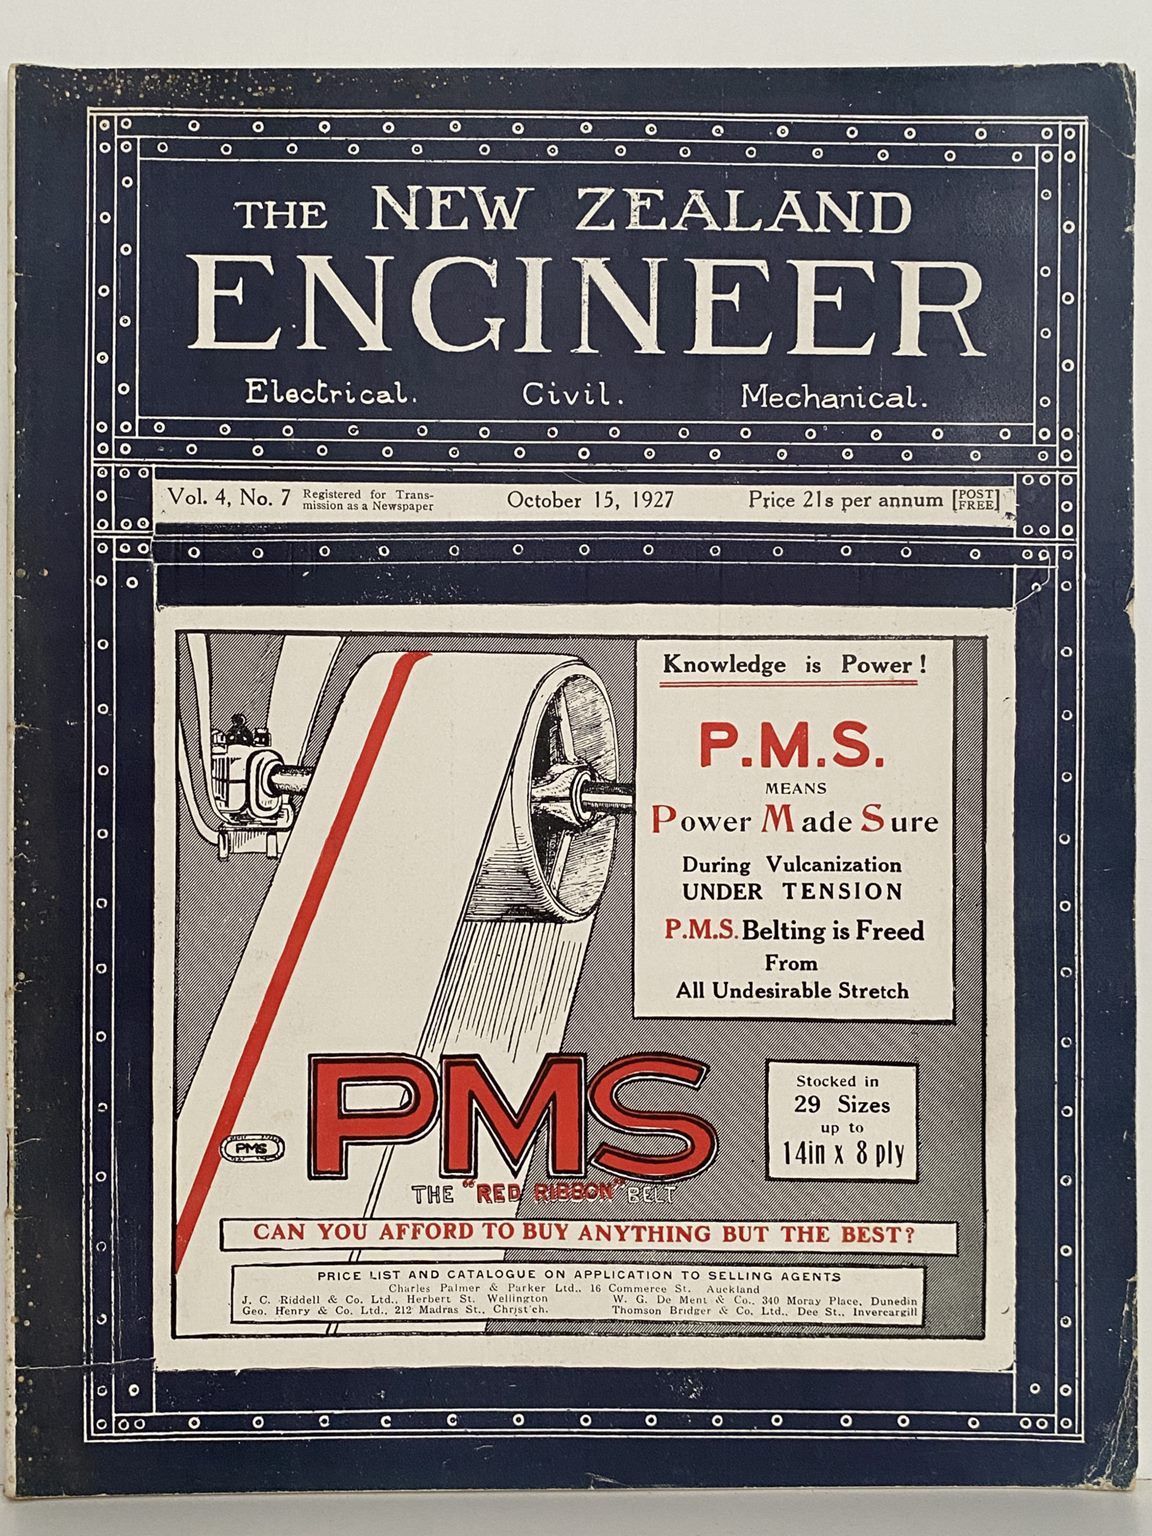 OLD MAGAZINE: The New Zealand Engineer Vol. 4, No. 7 - 15 October 1927